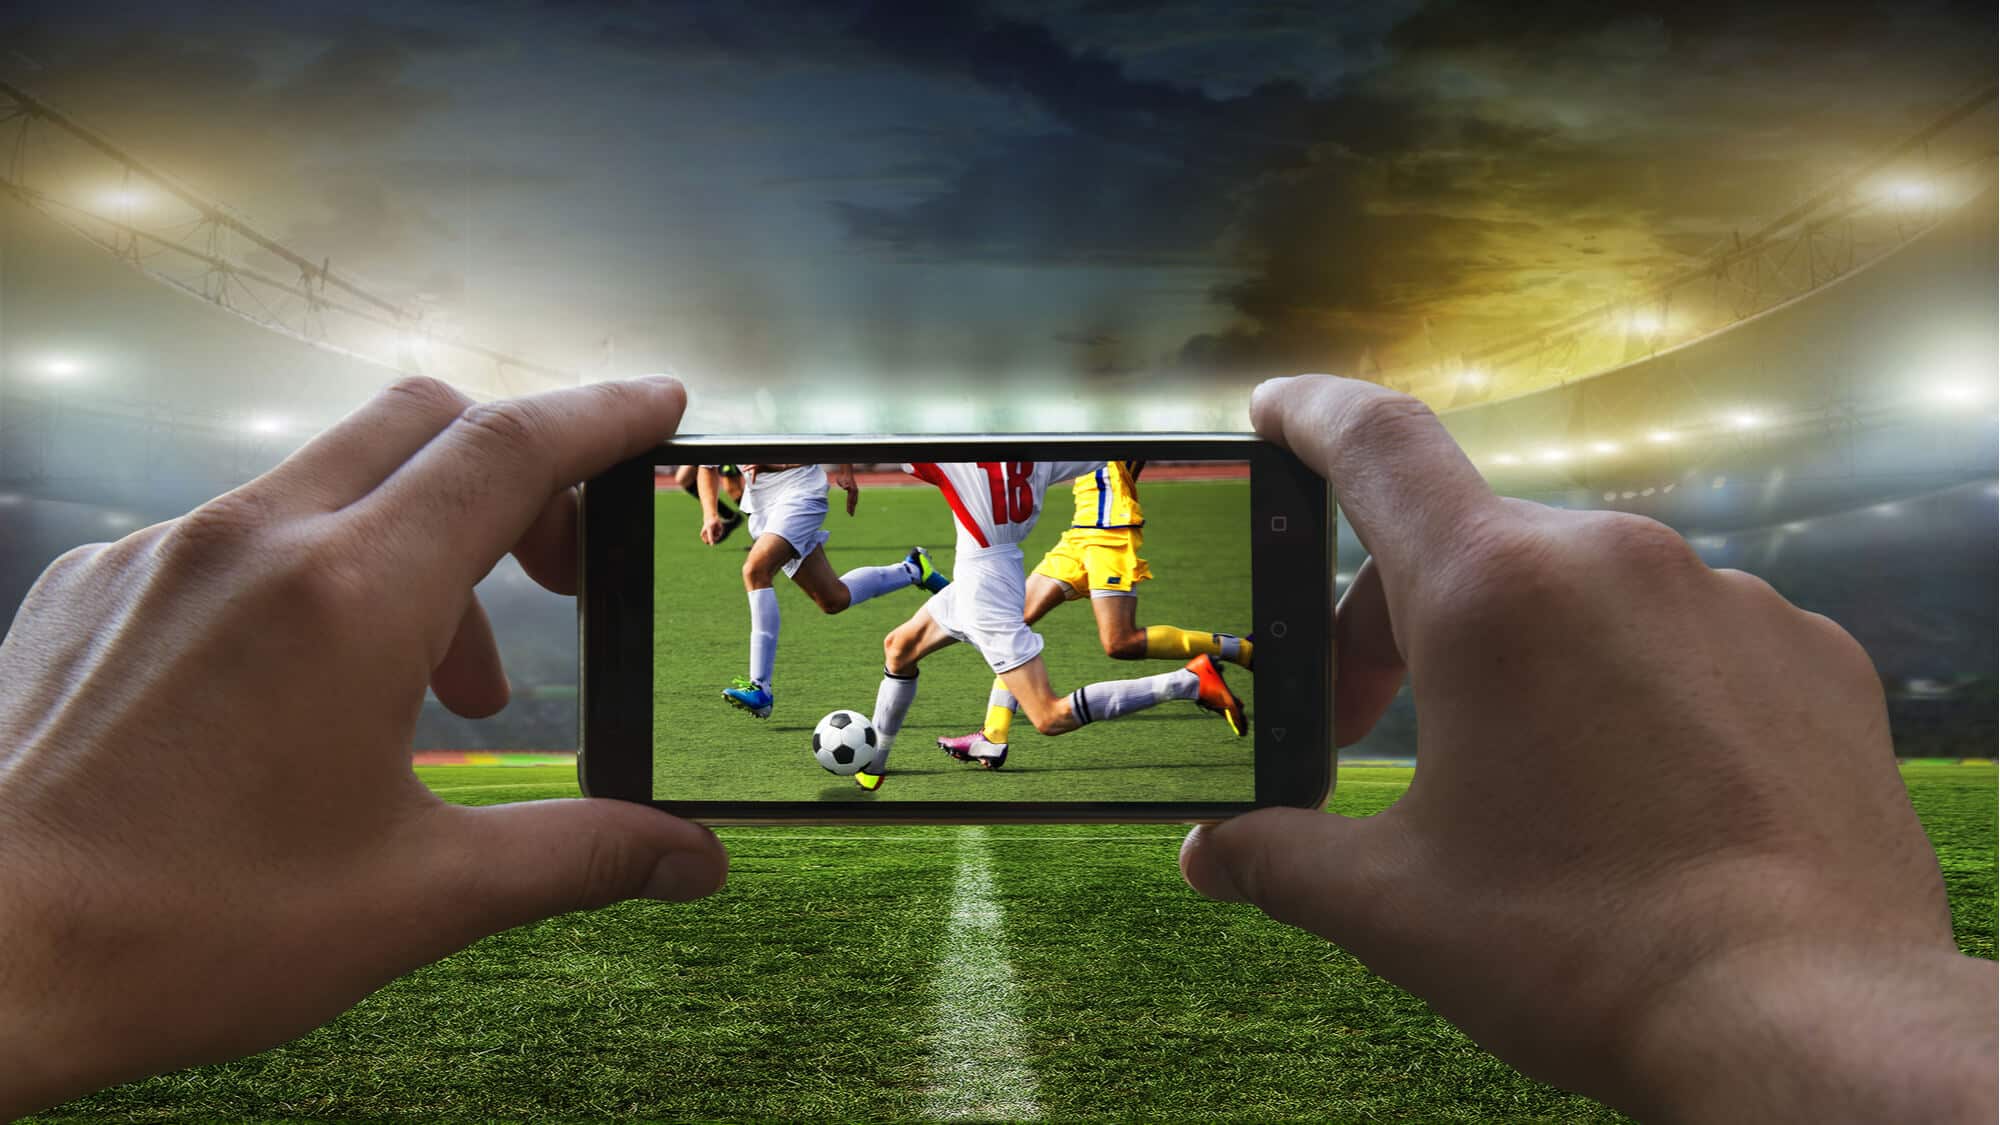 Mobile sports viewership dominated by Asia - Soccerscene